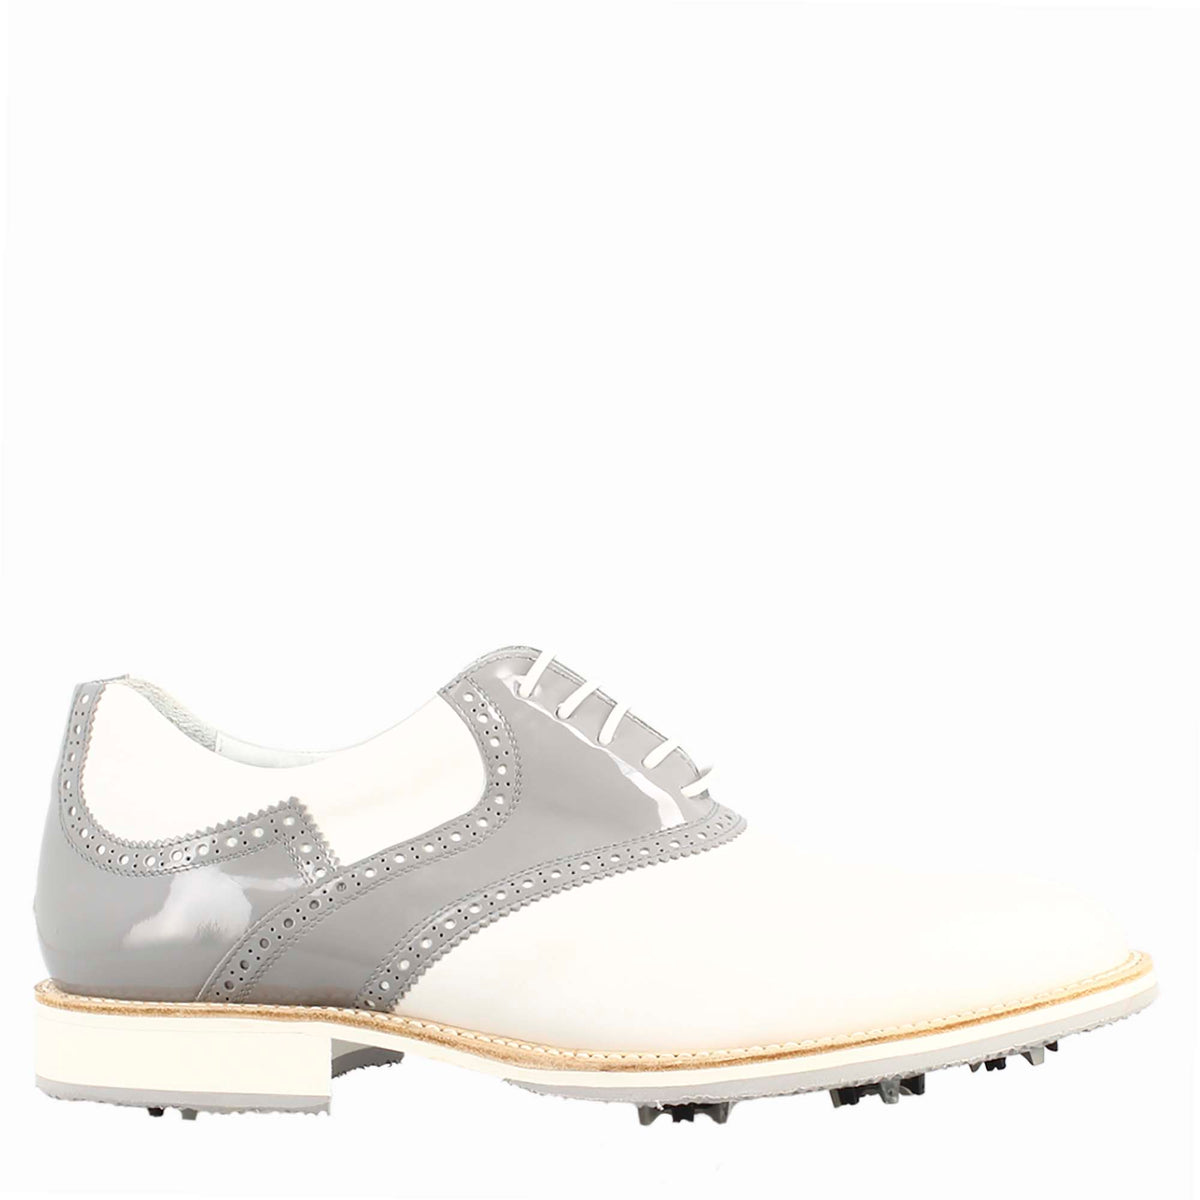 Women's golf shoes in white and grey leather handcrafted brogue details